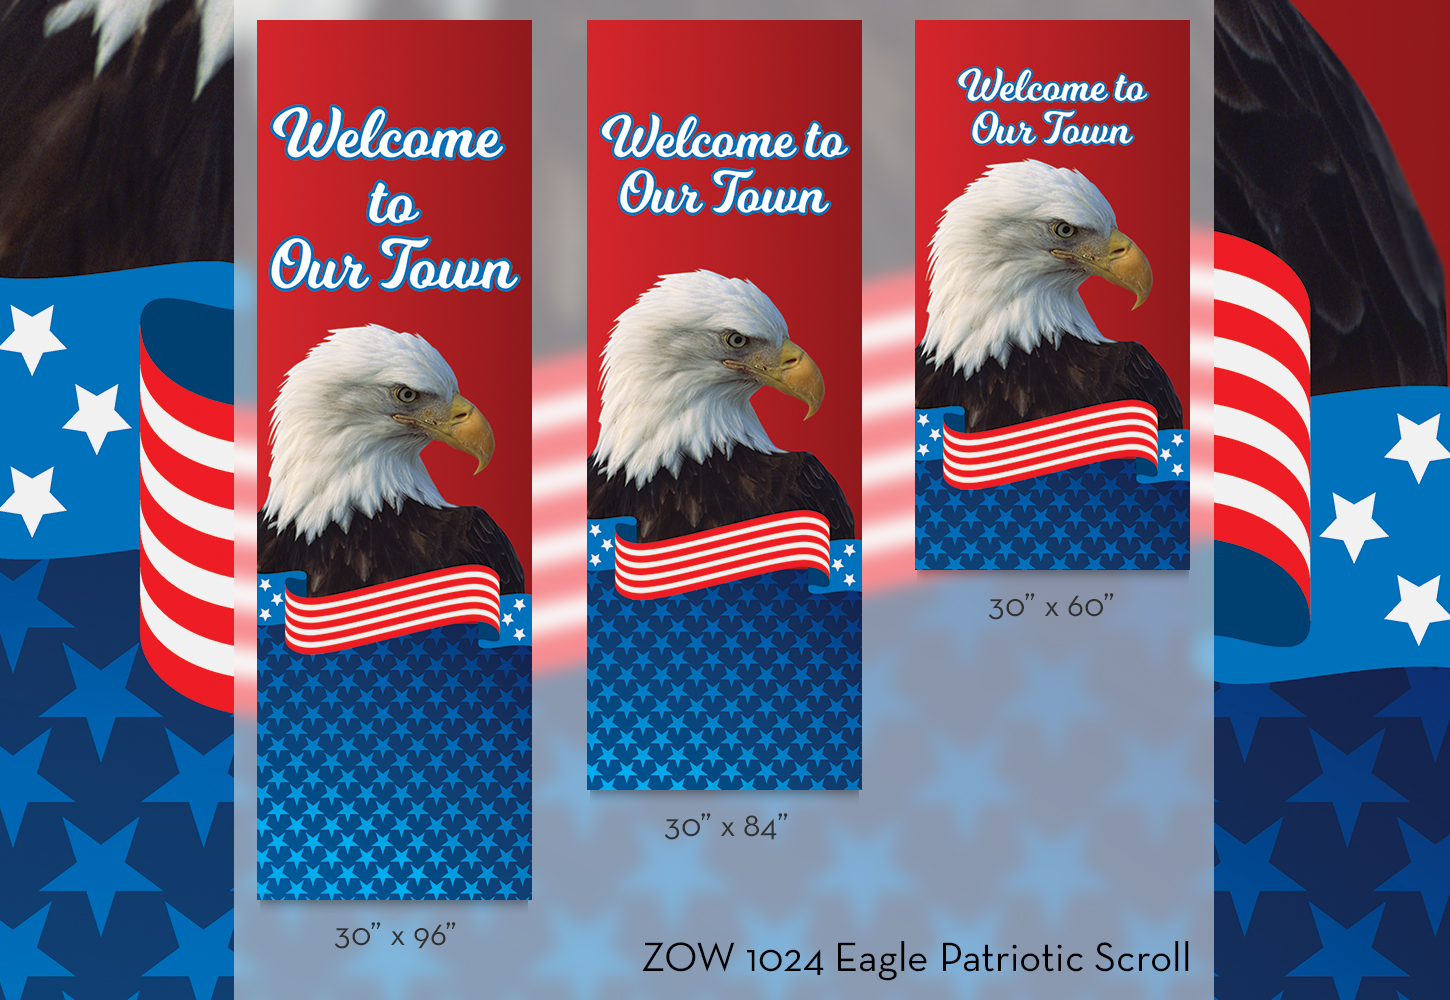 ZOW 1024 Eagle Patriotic Scroll